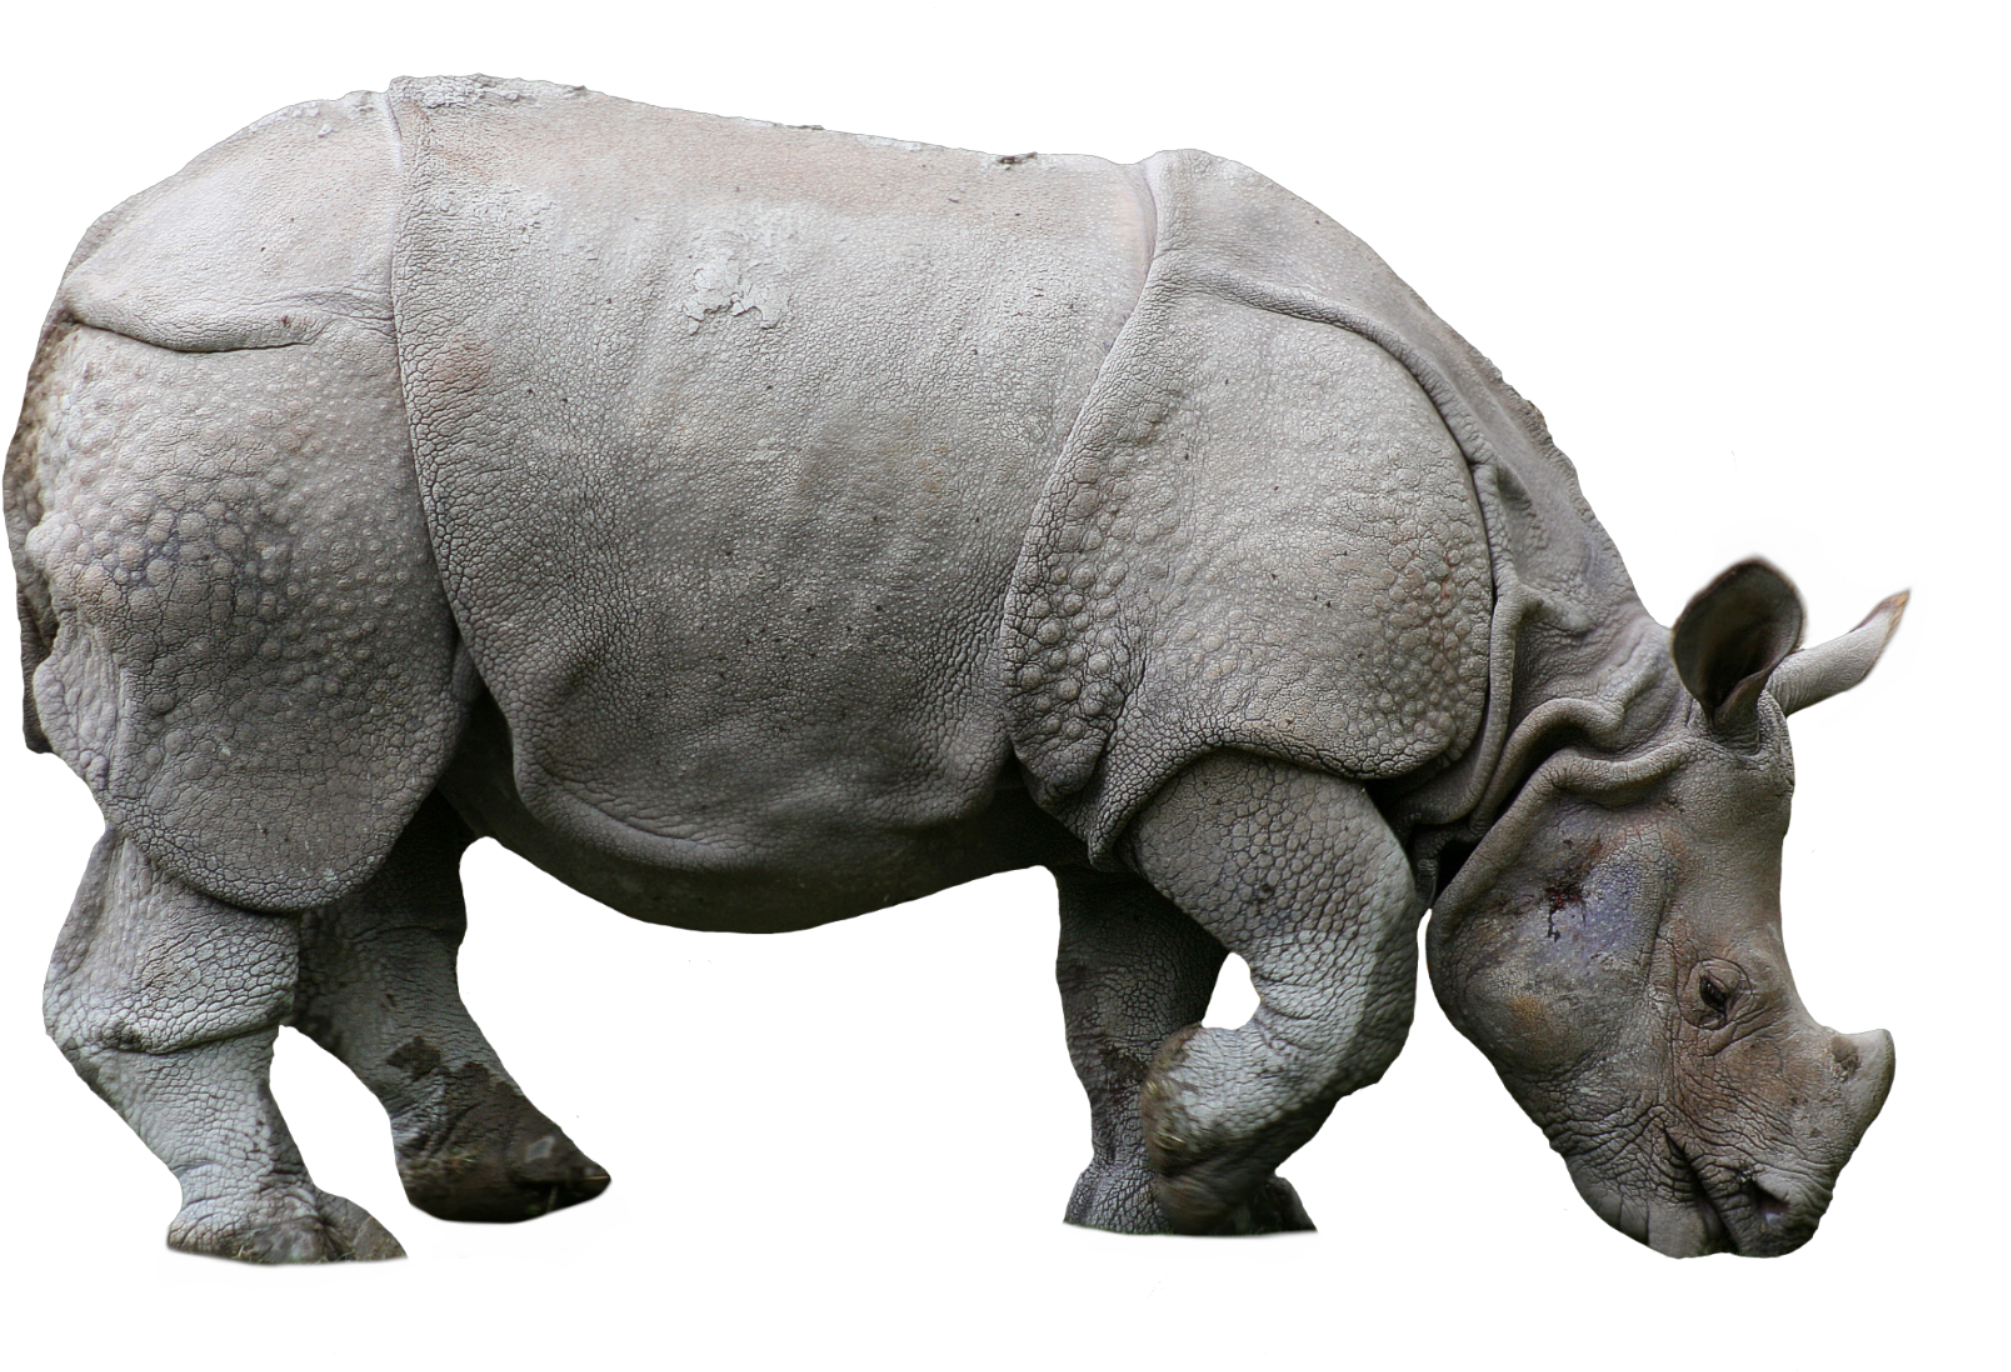 A Rhinoceros Standing On Its Hind Legs